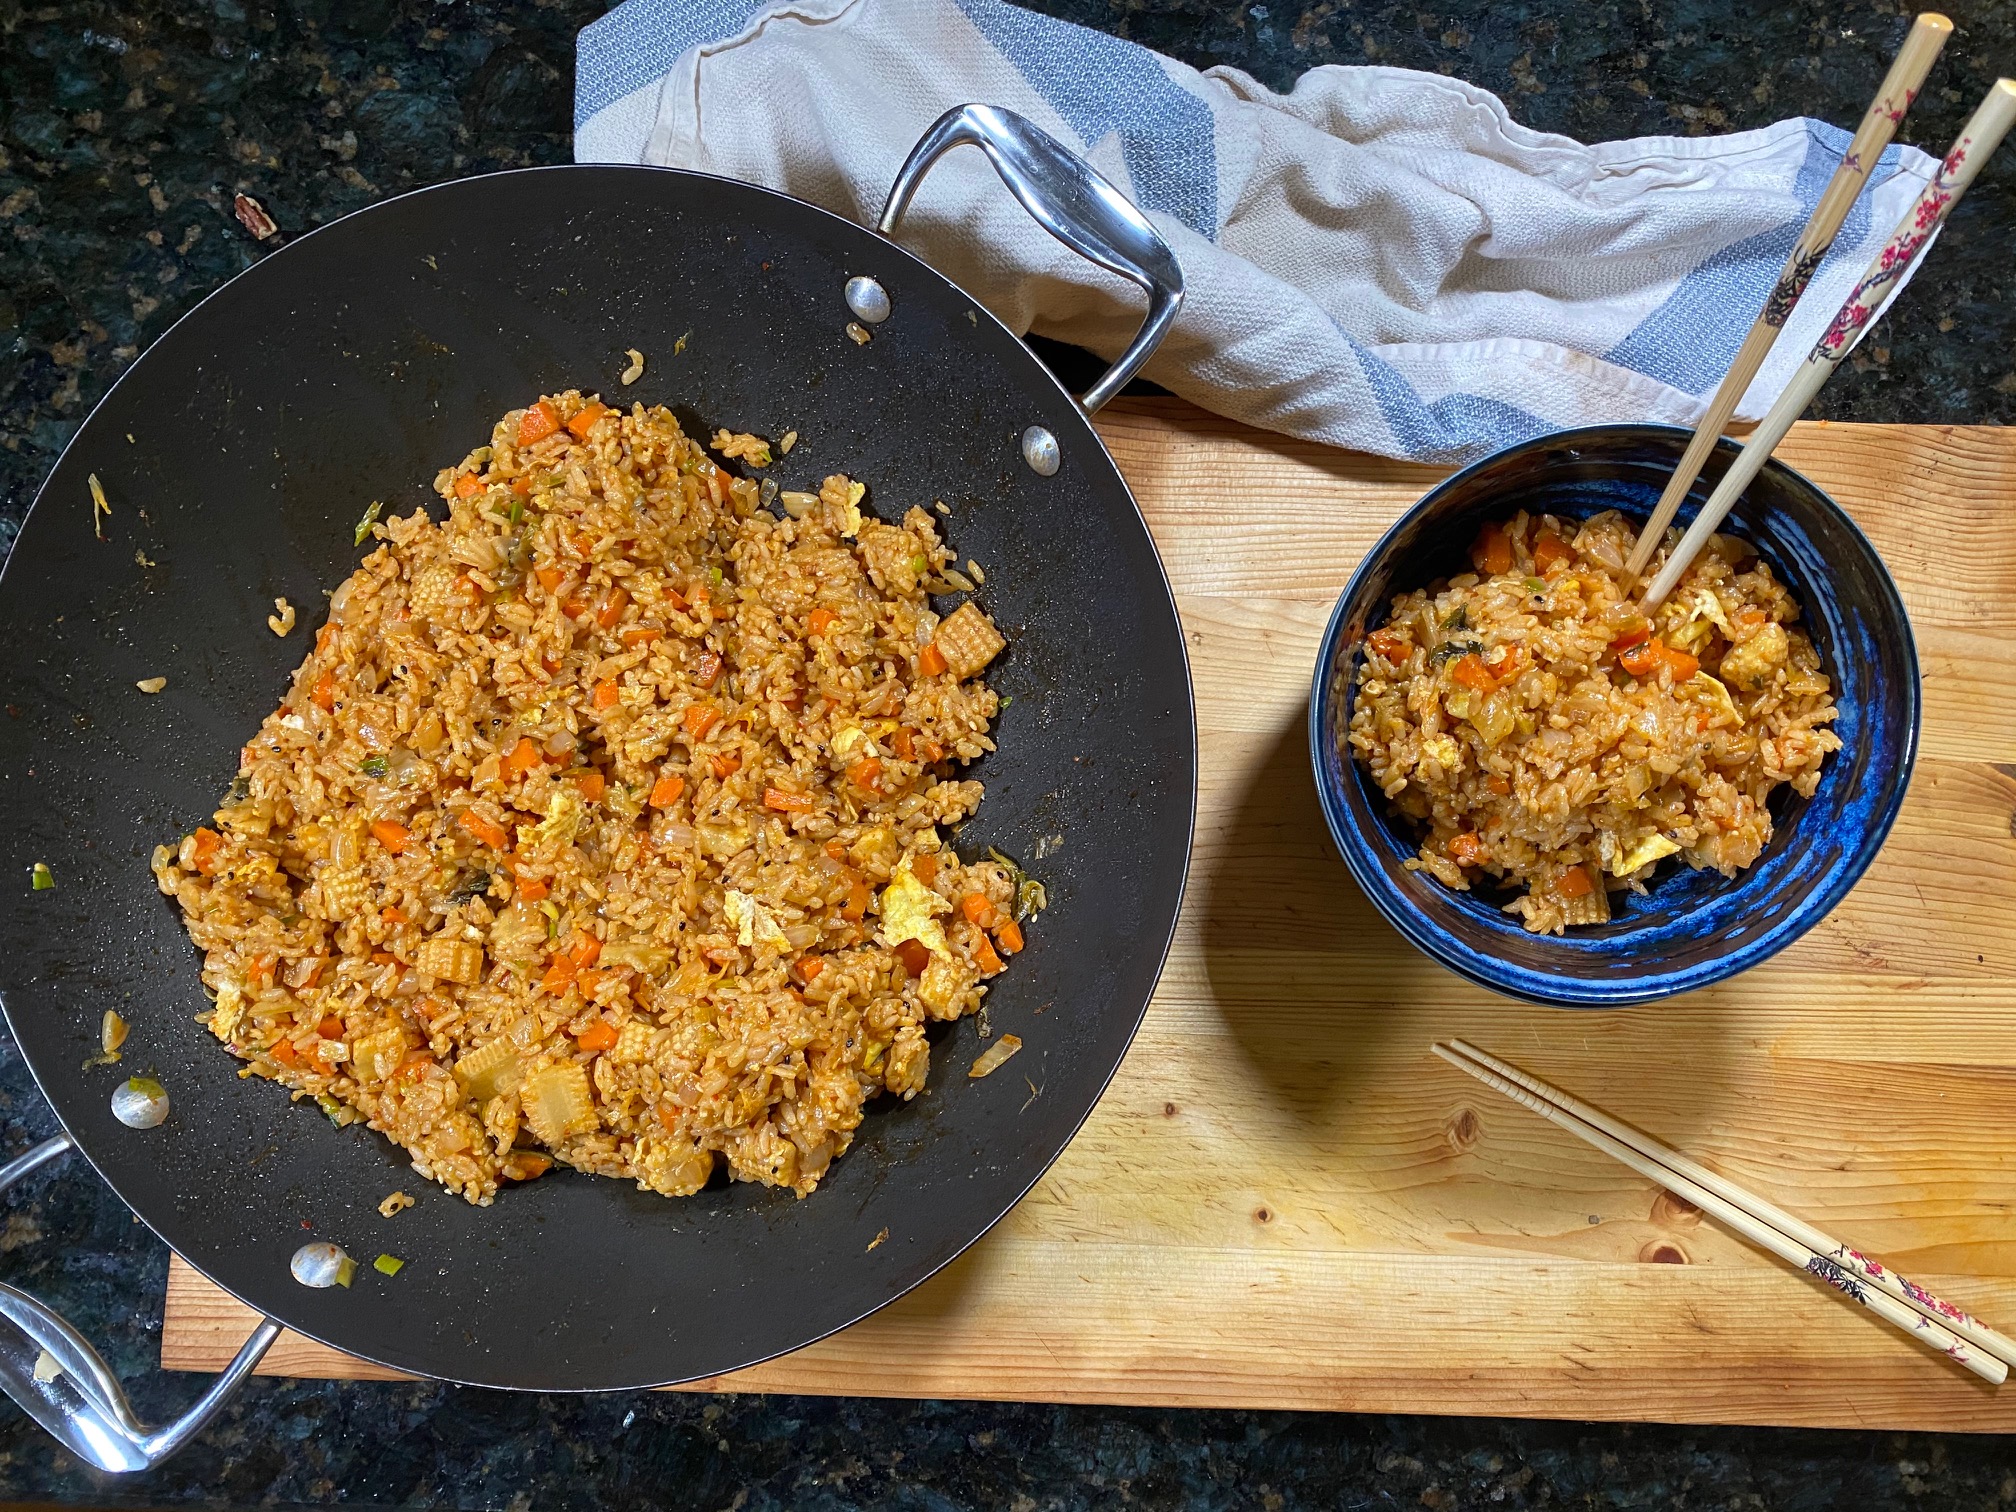 IMG 4705 - Vegetarian Kimchi Fried Rice in Under 30 Minutes